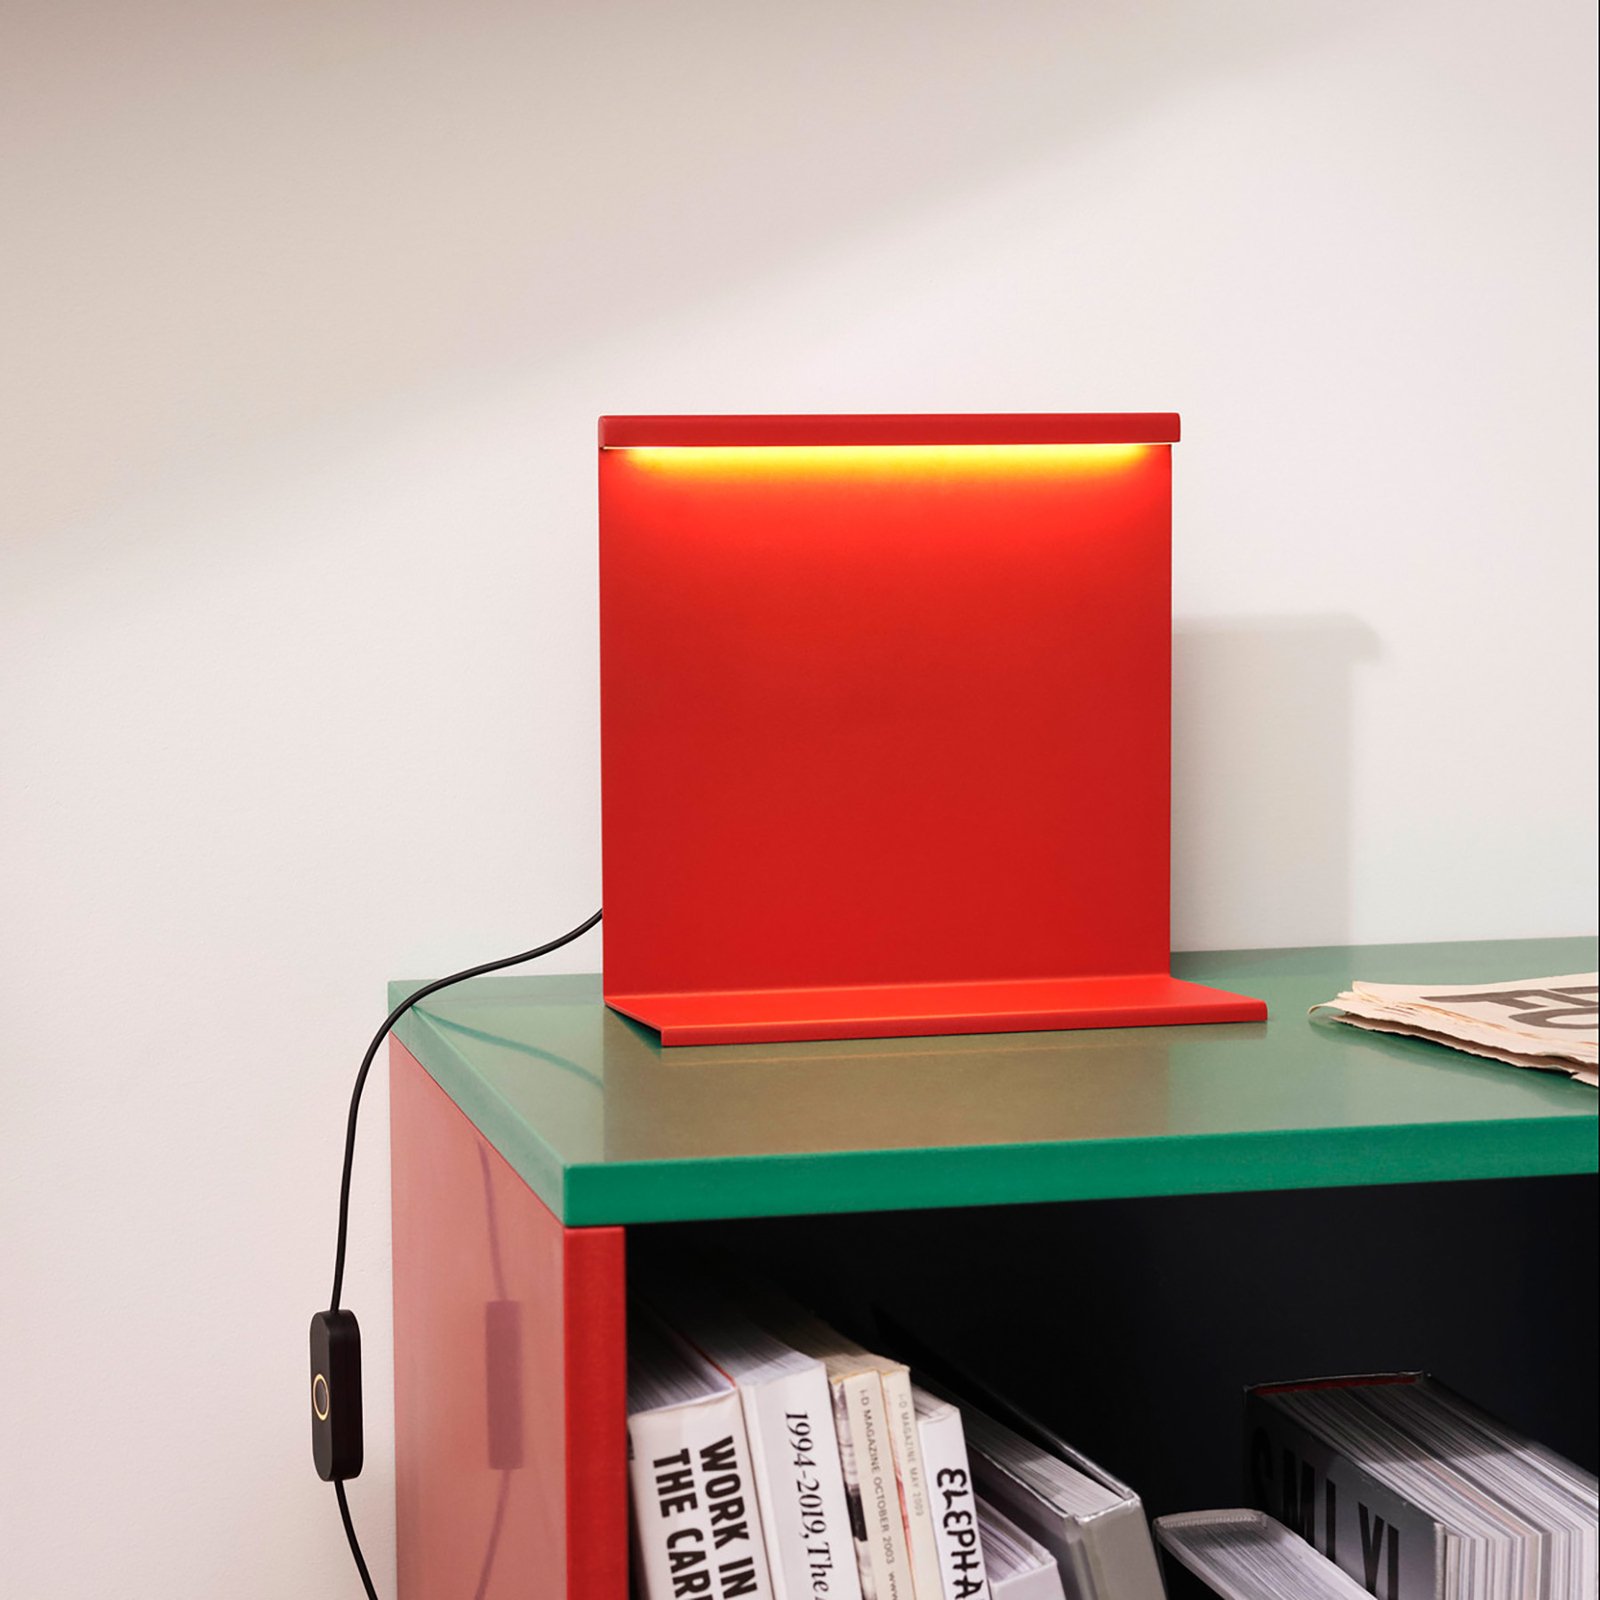 HAY LBM LED table lamp with dimmer, tomato red